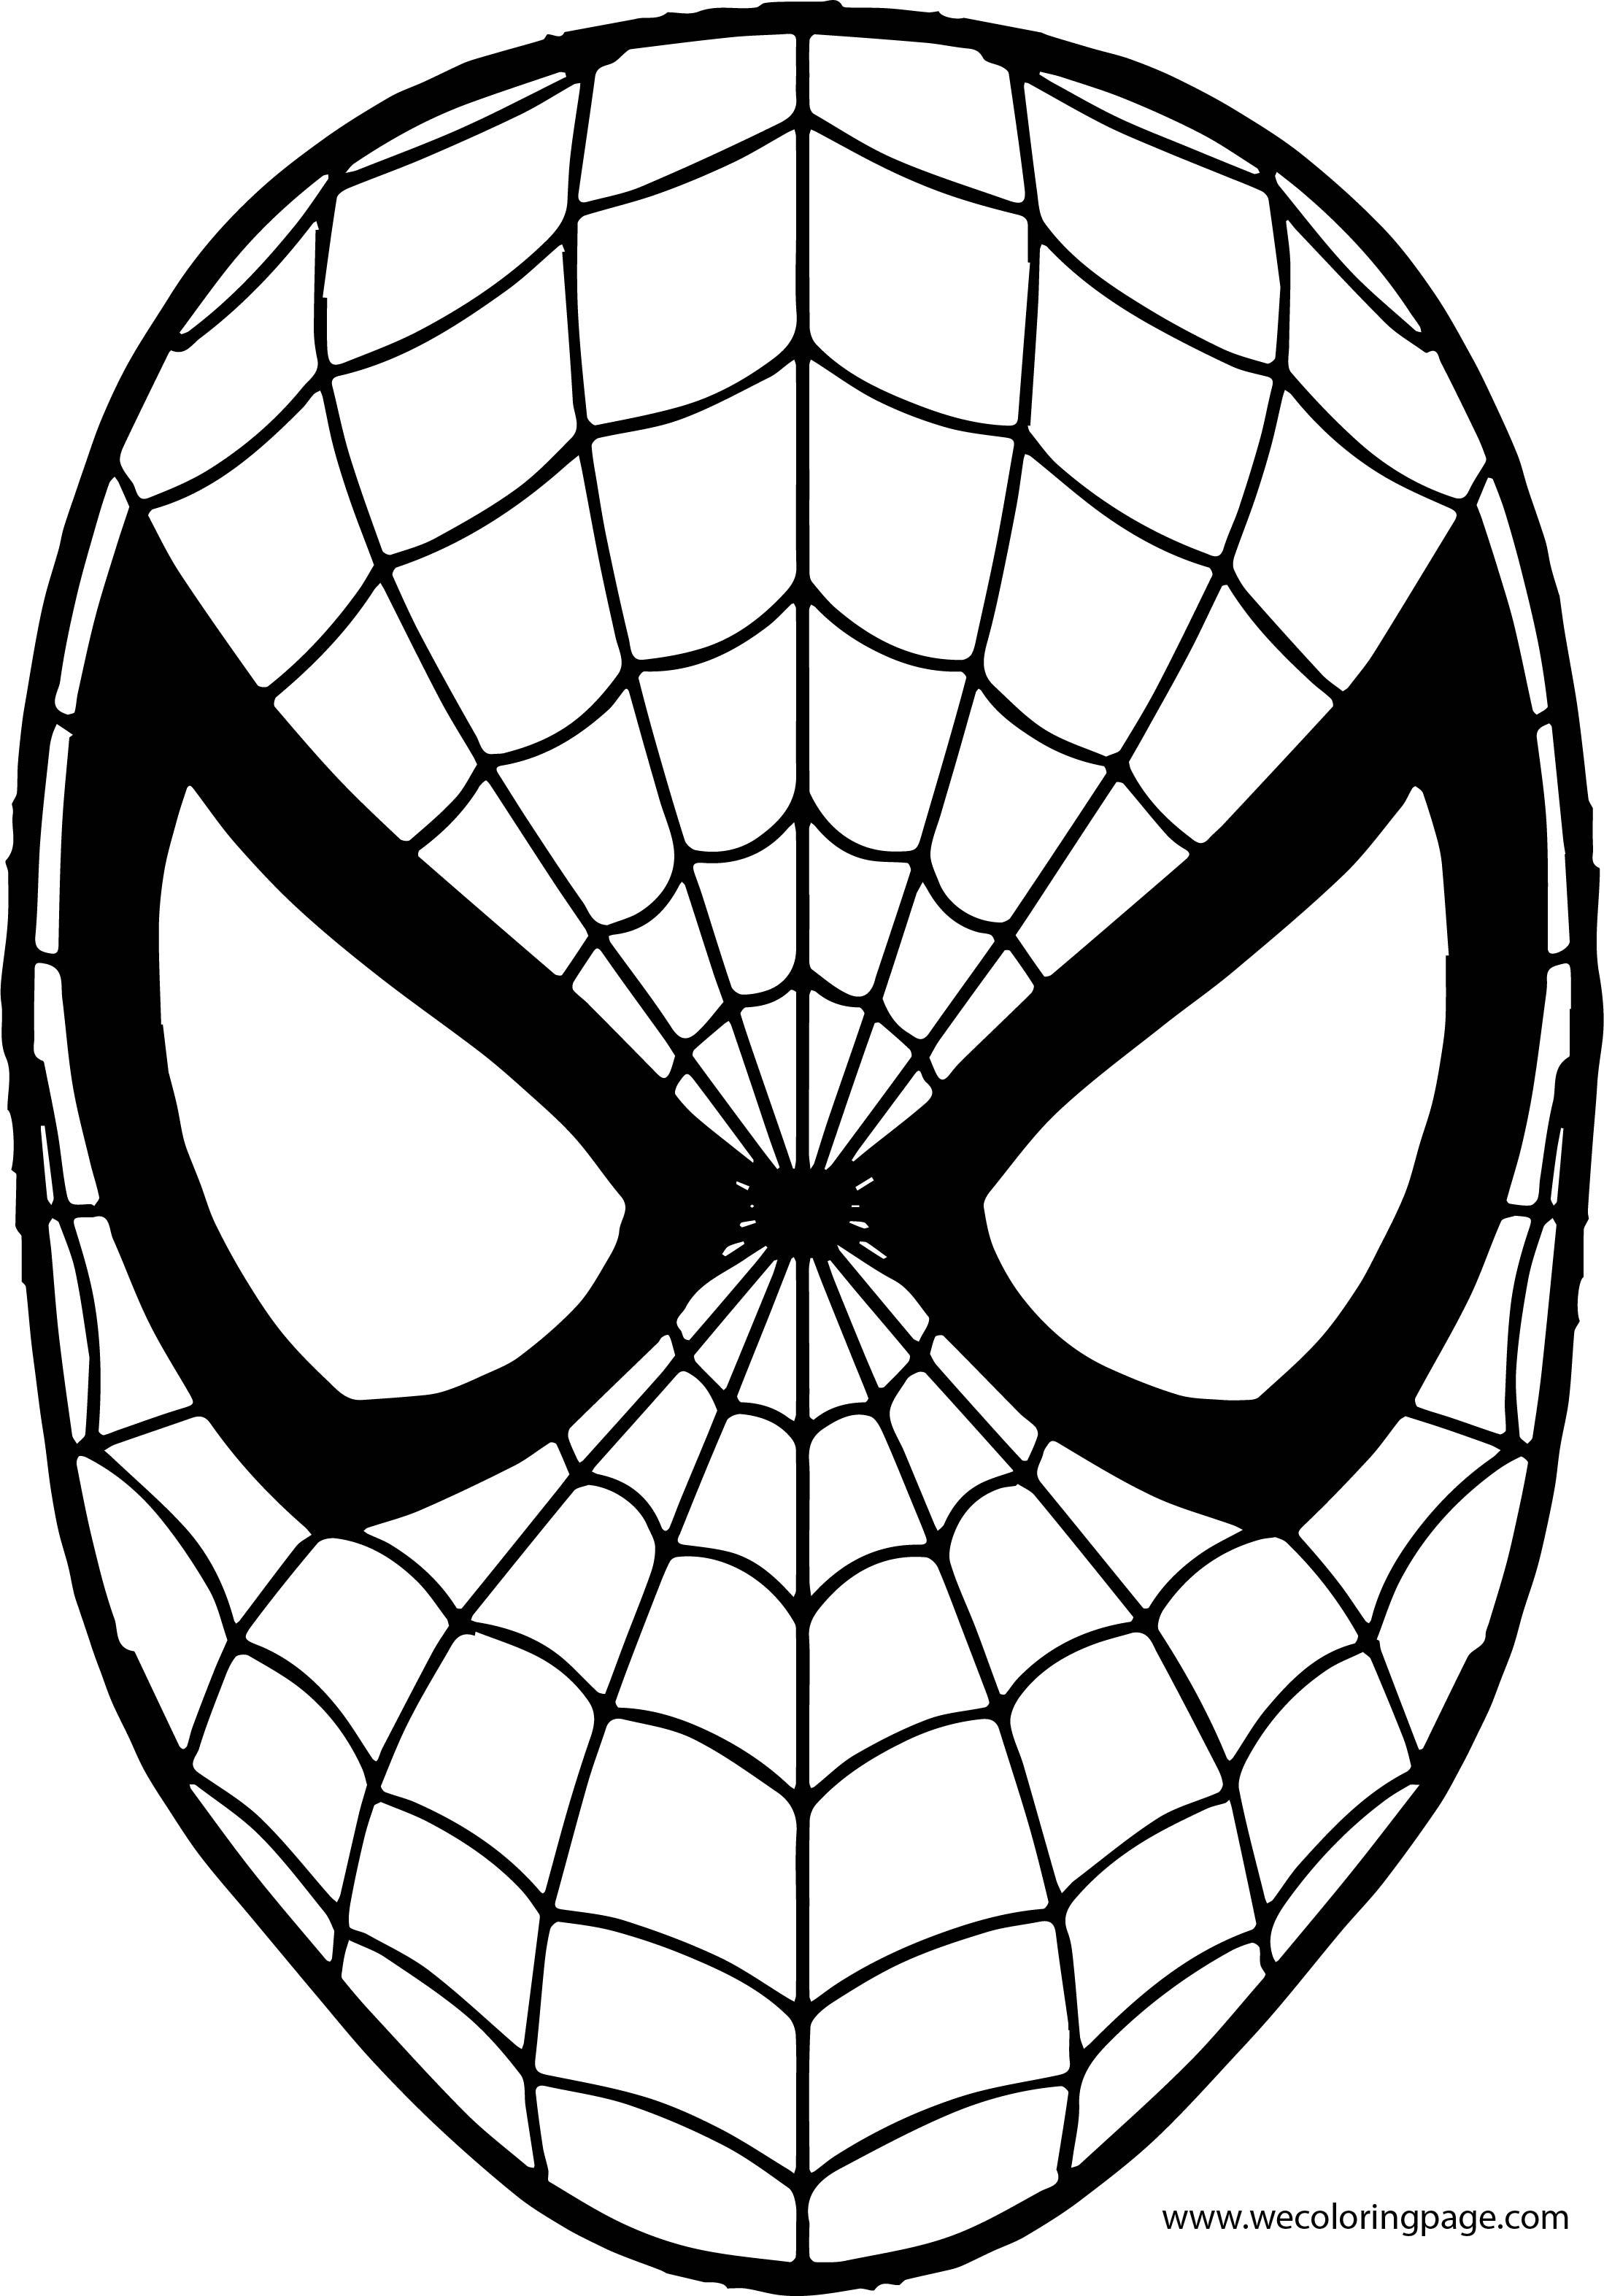 Coloring pages kids: Spiderman Mask Coloring Sheet